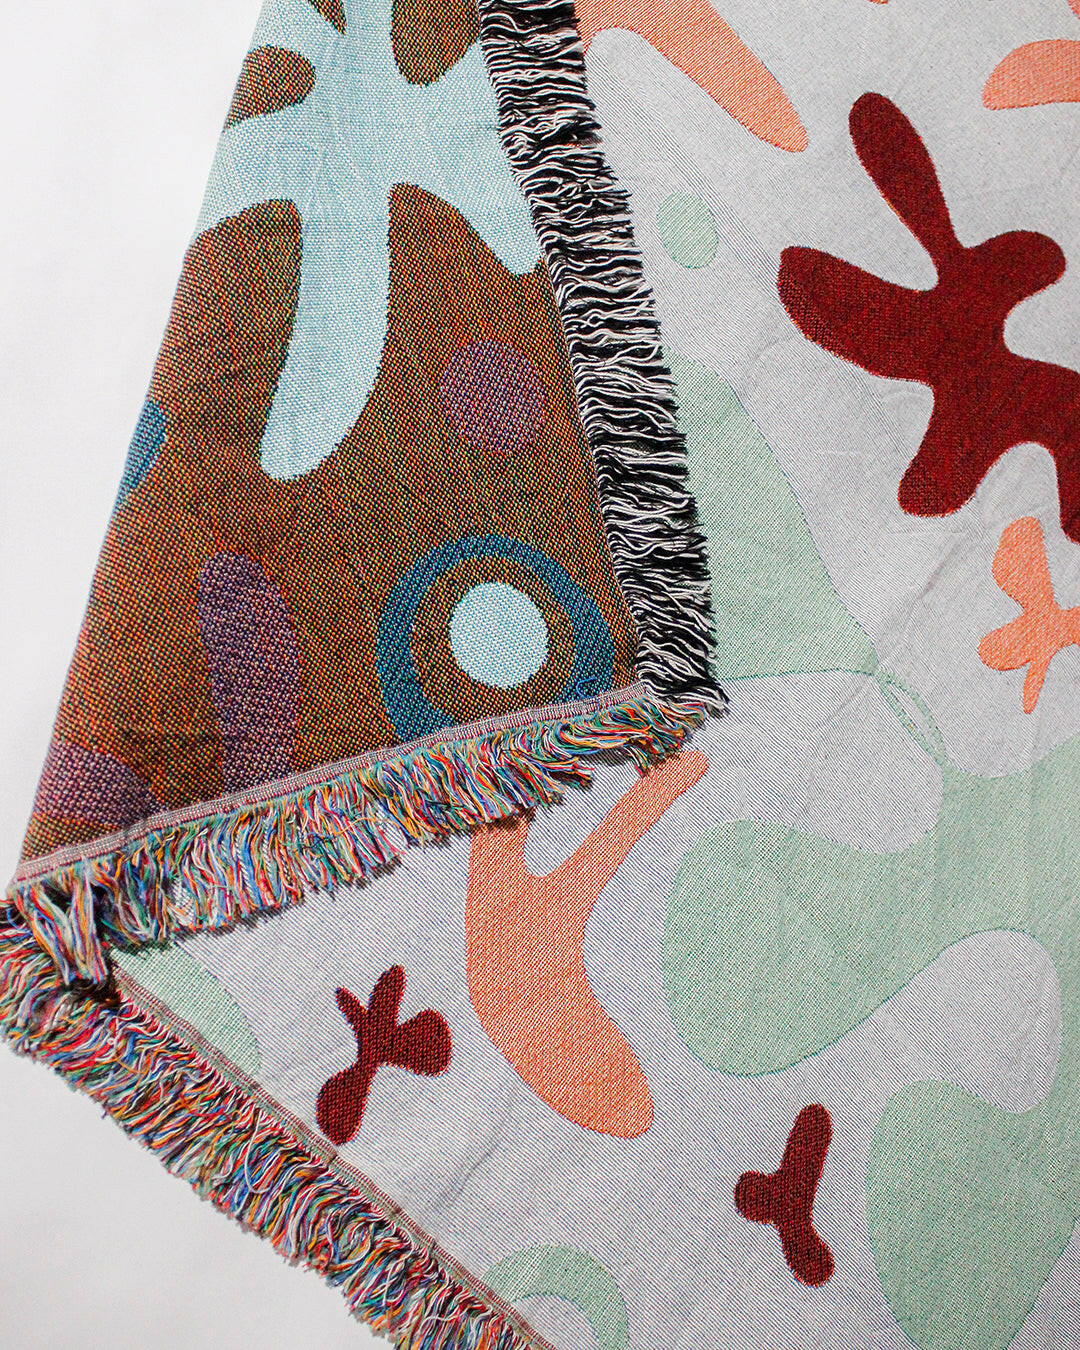 Amoeba Party Cotton Woven Throw Blanket with a blend of colors and fringe edges.